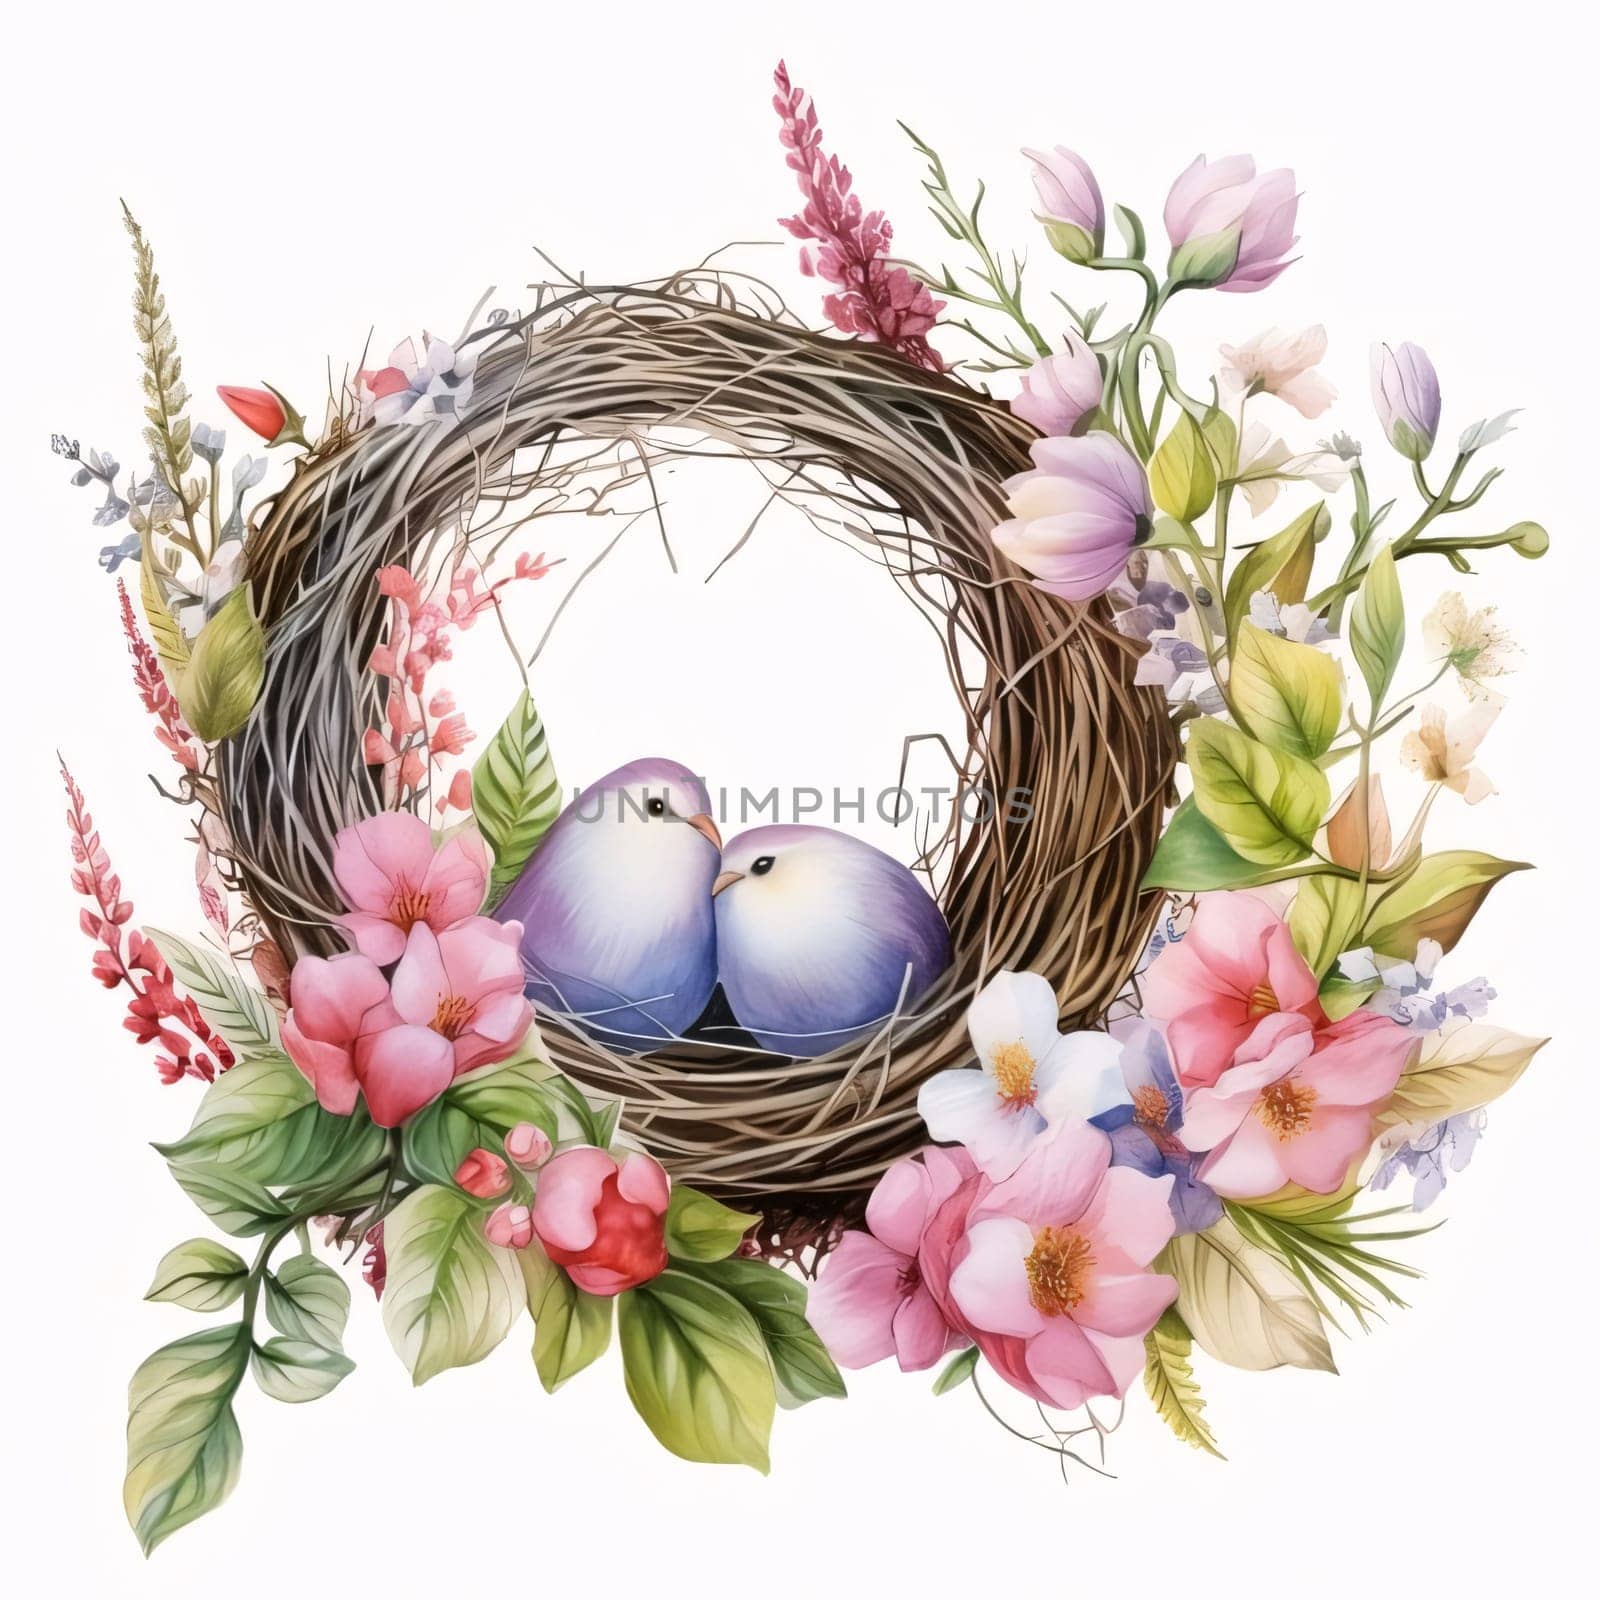 A beautiful illustration of two birds cuddling in a lush wreath, filled with vibrant flowers and greenery.